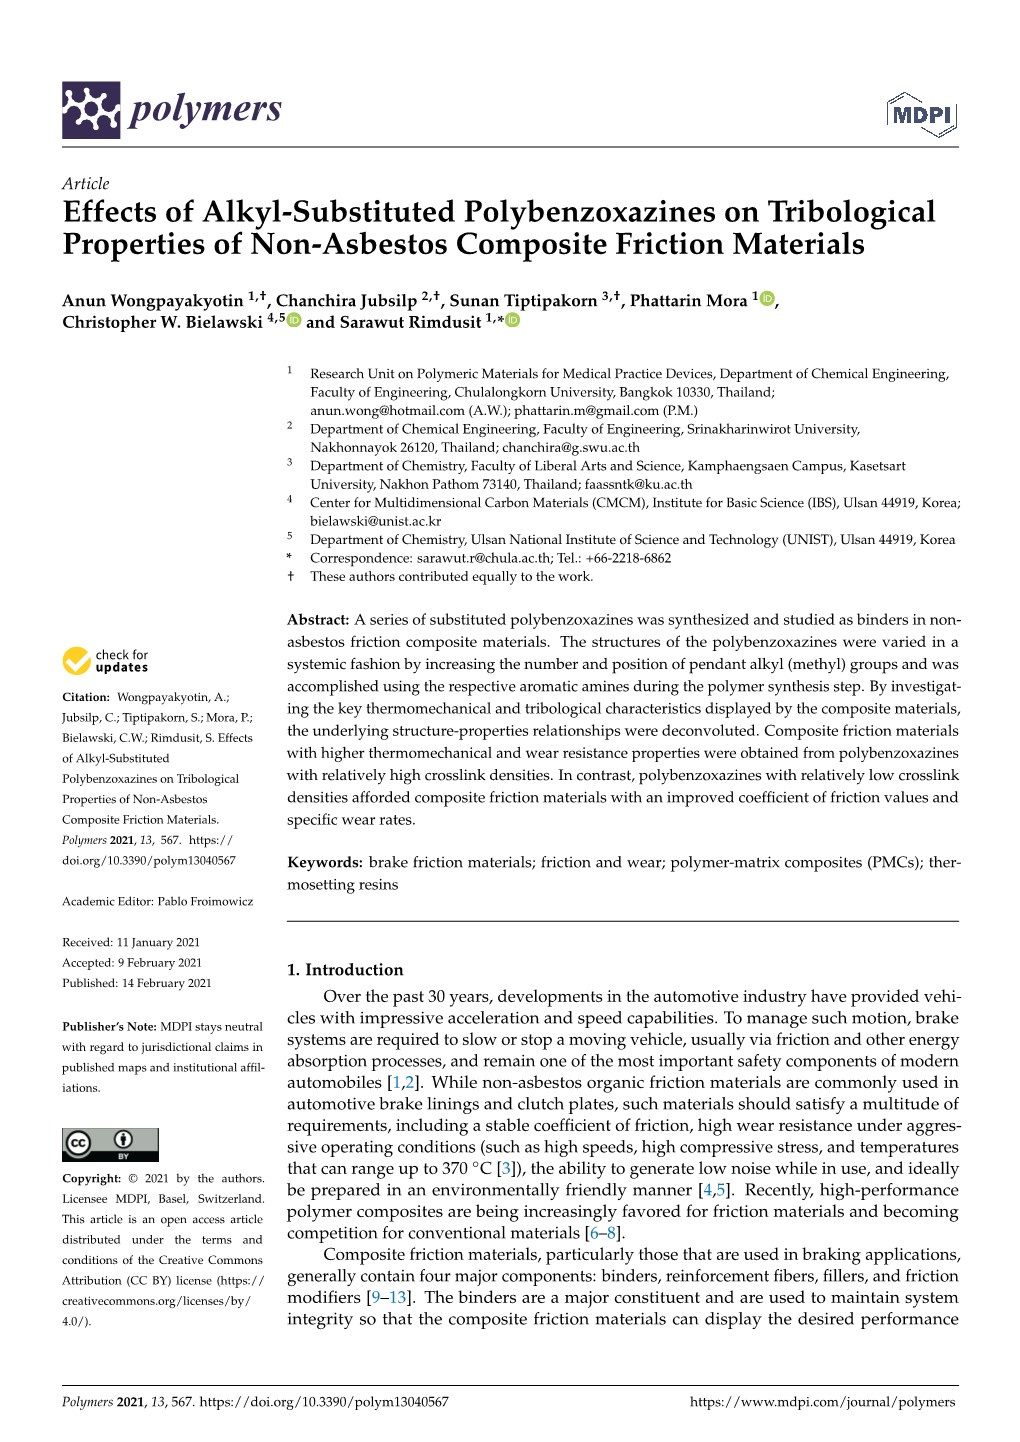 Effects of Alkyl-Substituted Polybenzoxazines on Tribological Properties of Non-Asbestos Composite Friction Materials